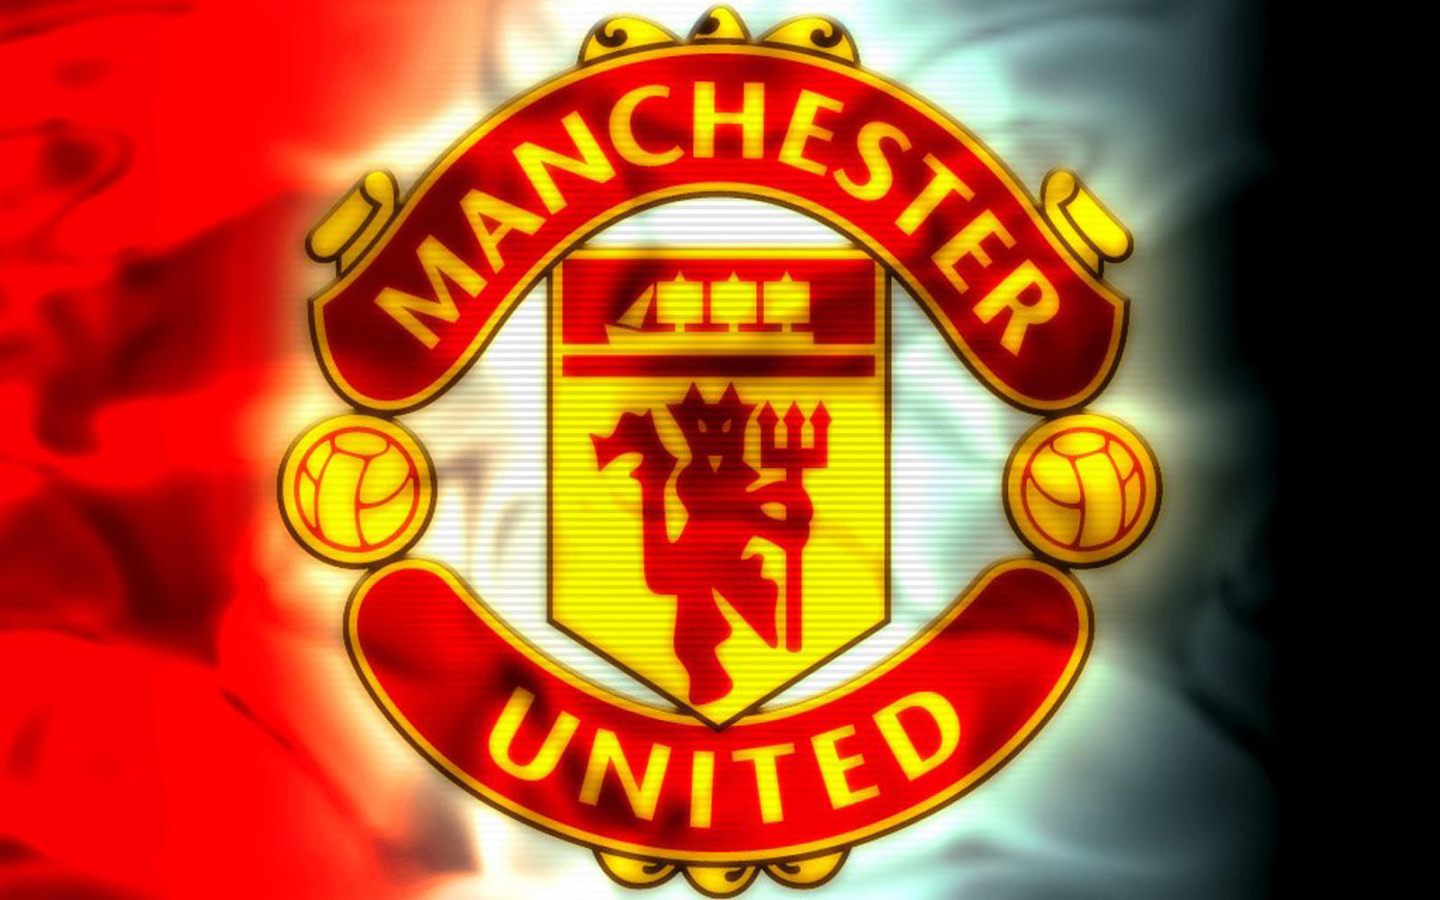 Manchester United football club of england